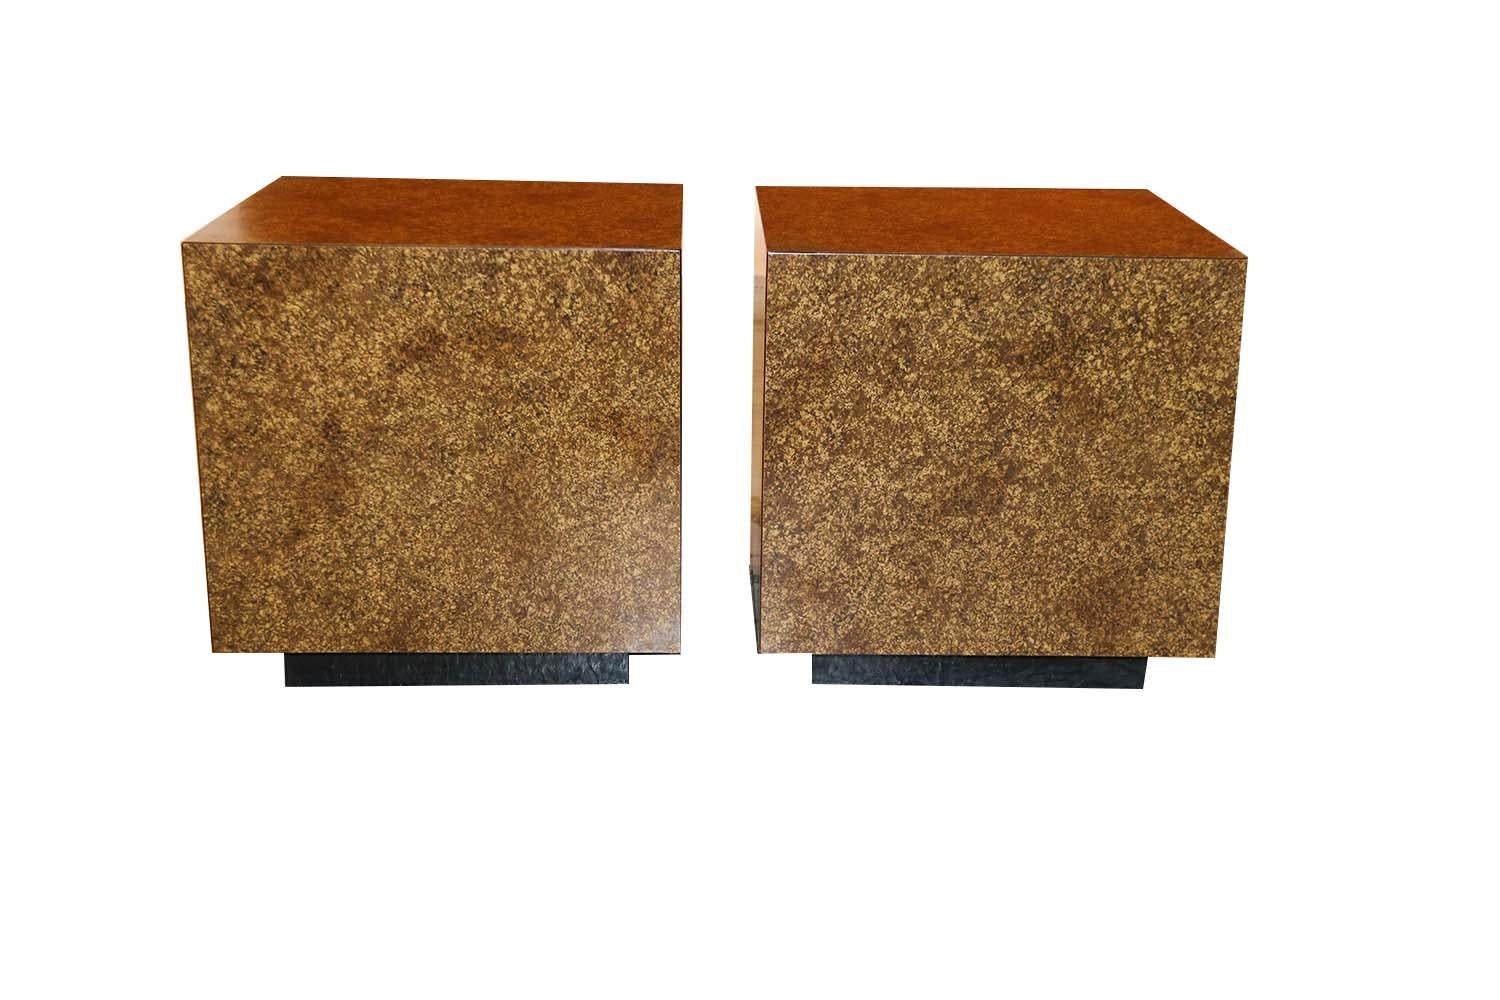 American Midcentury Faux Tortoise Shell Cube Tables